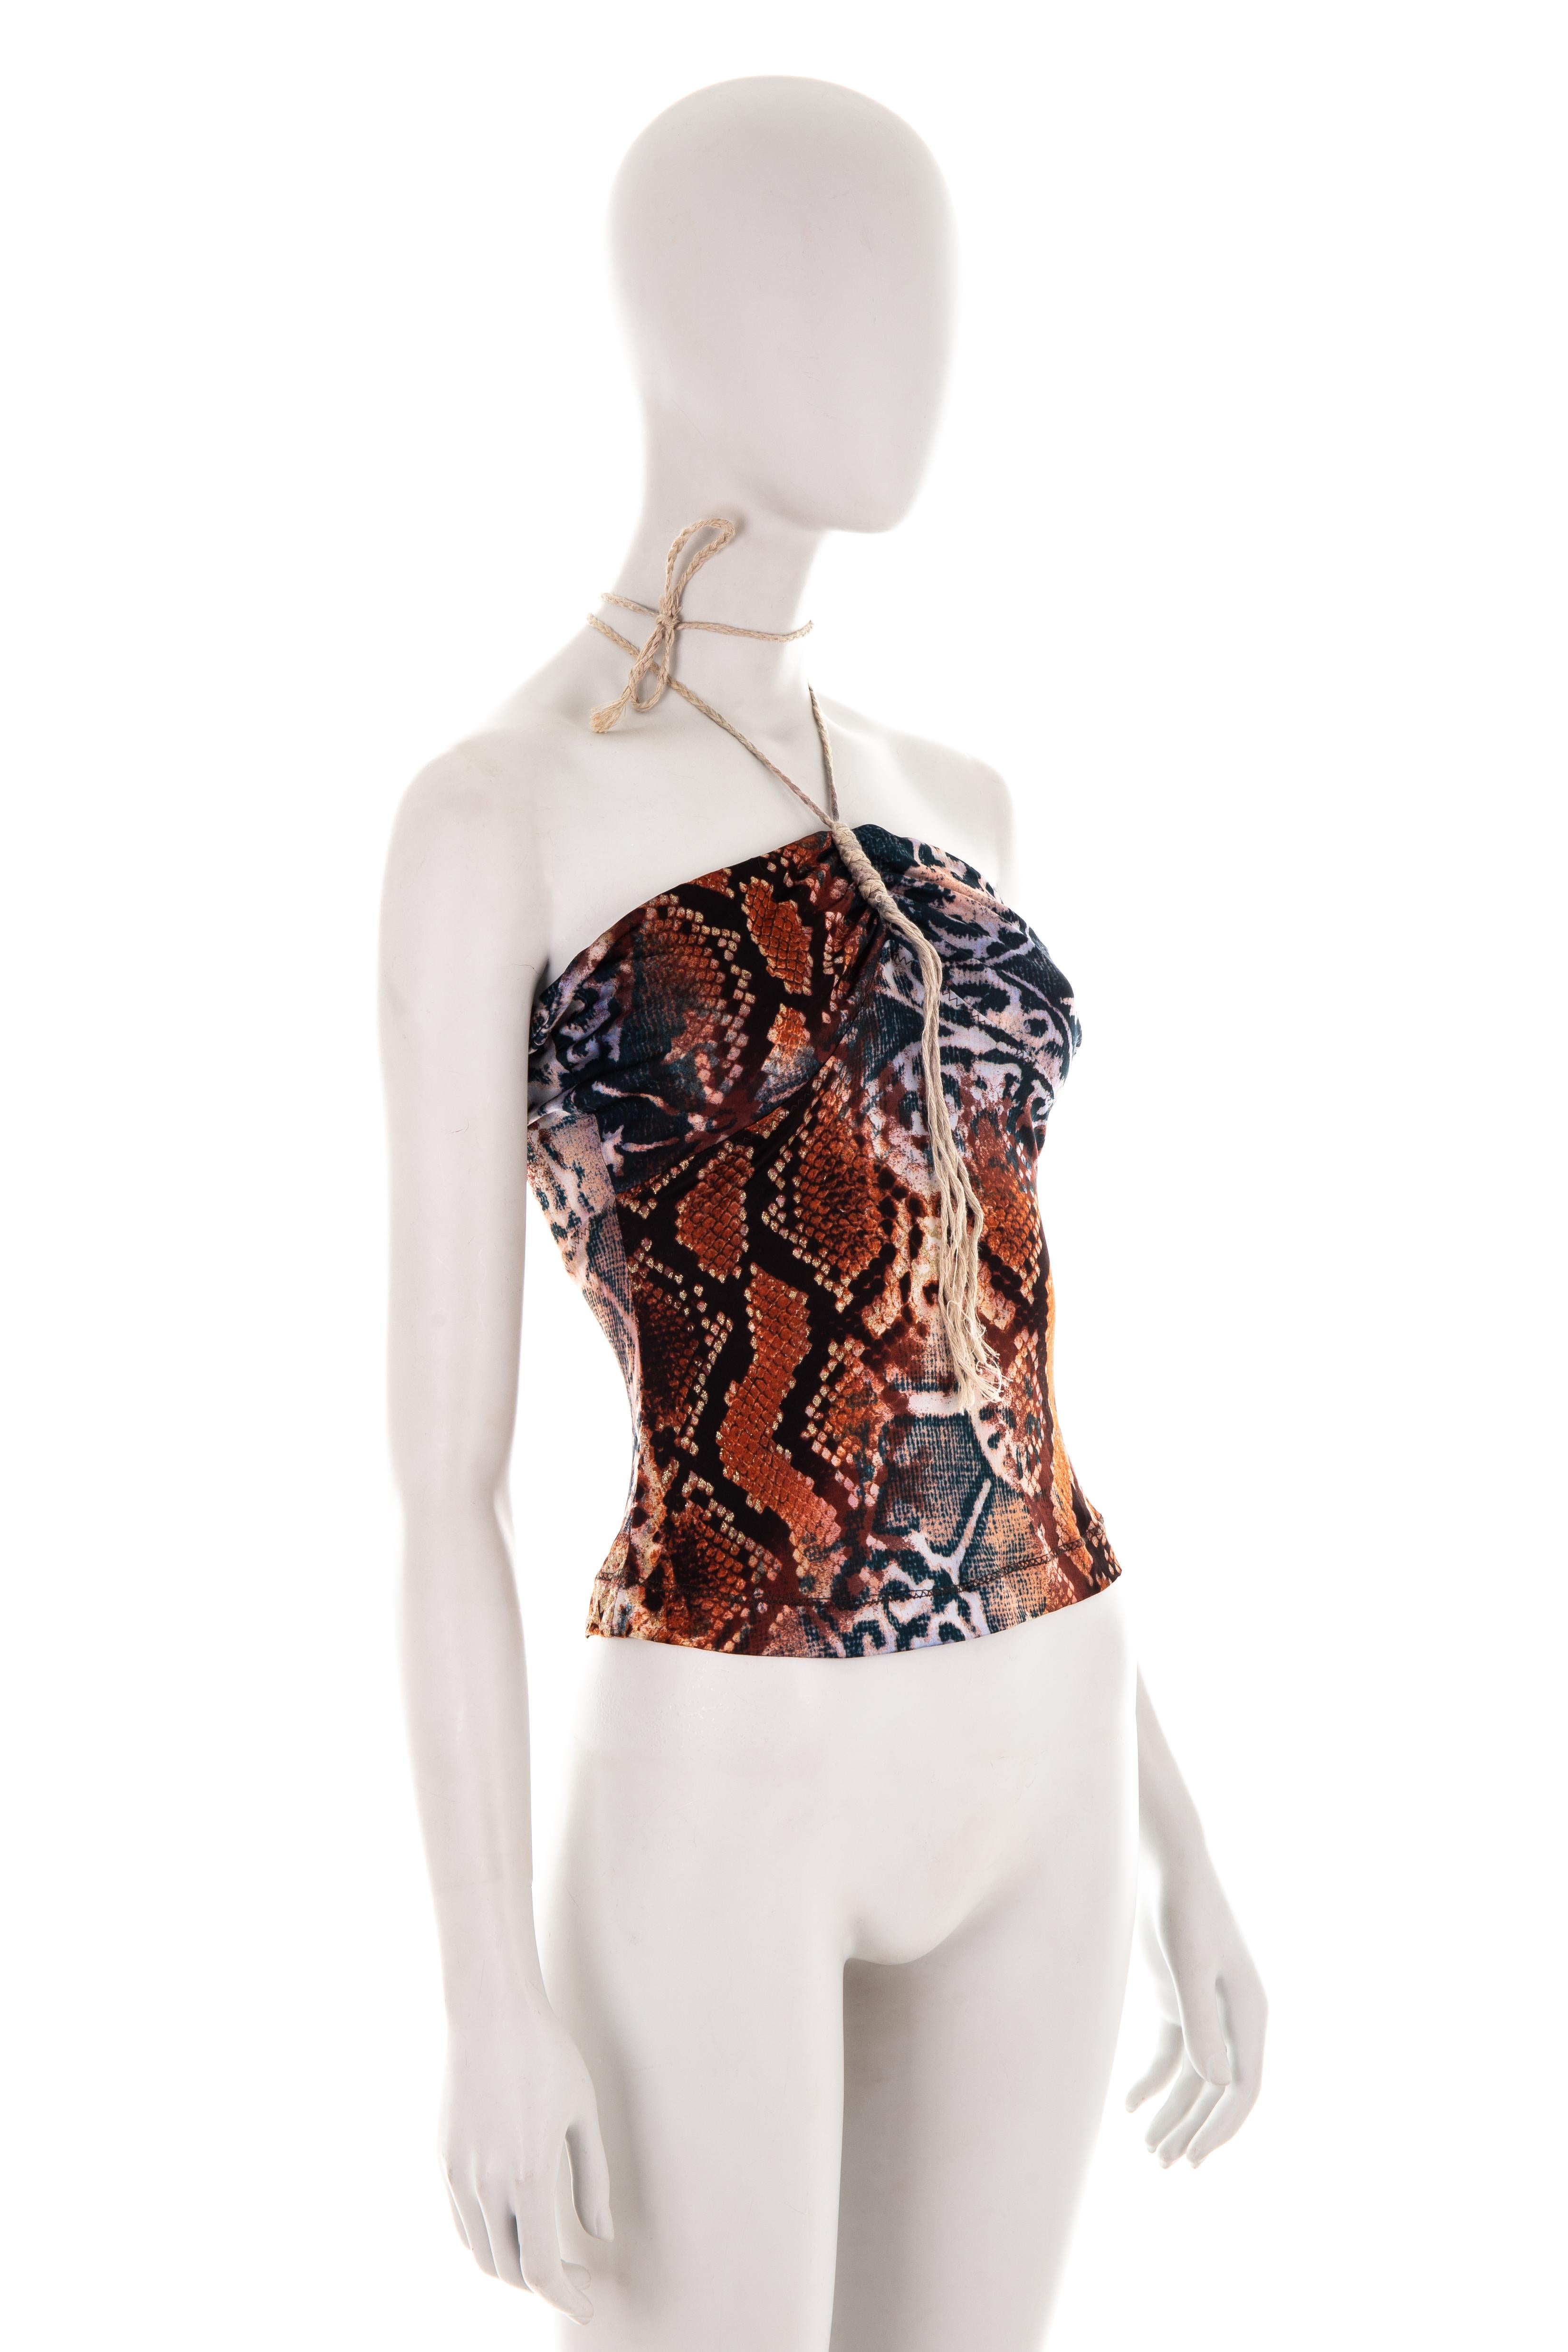 - Just Cavalli by Roberto Cavalli
- Spring-summer 2006 collection
- Sold by Gold Palms Vintage
- Viscose halter top with multi-colored graphic python print 
- Cream wrap-around string necklace
- Back cut-out detail 
- Size: IT 40